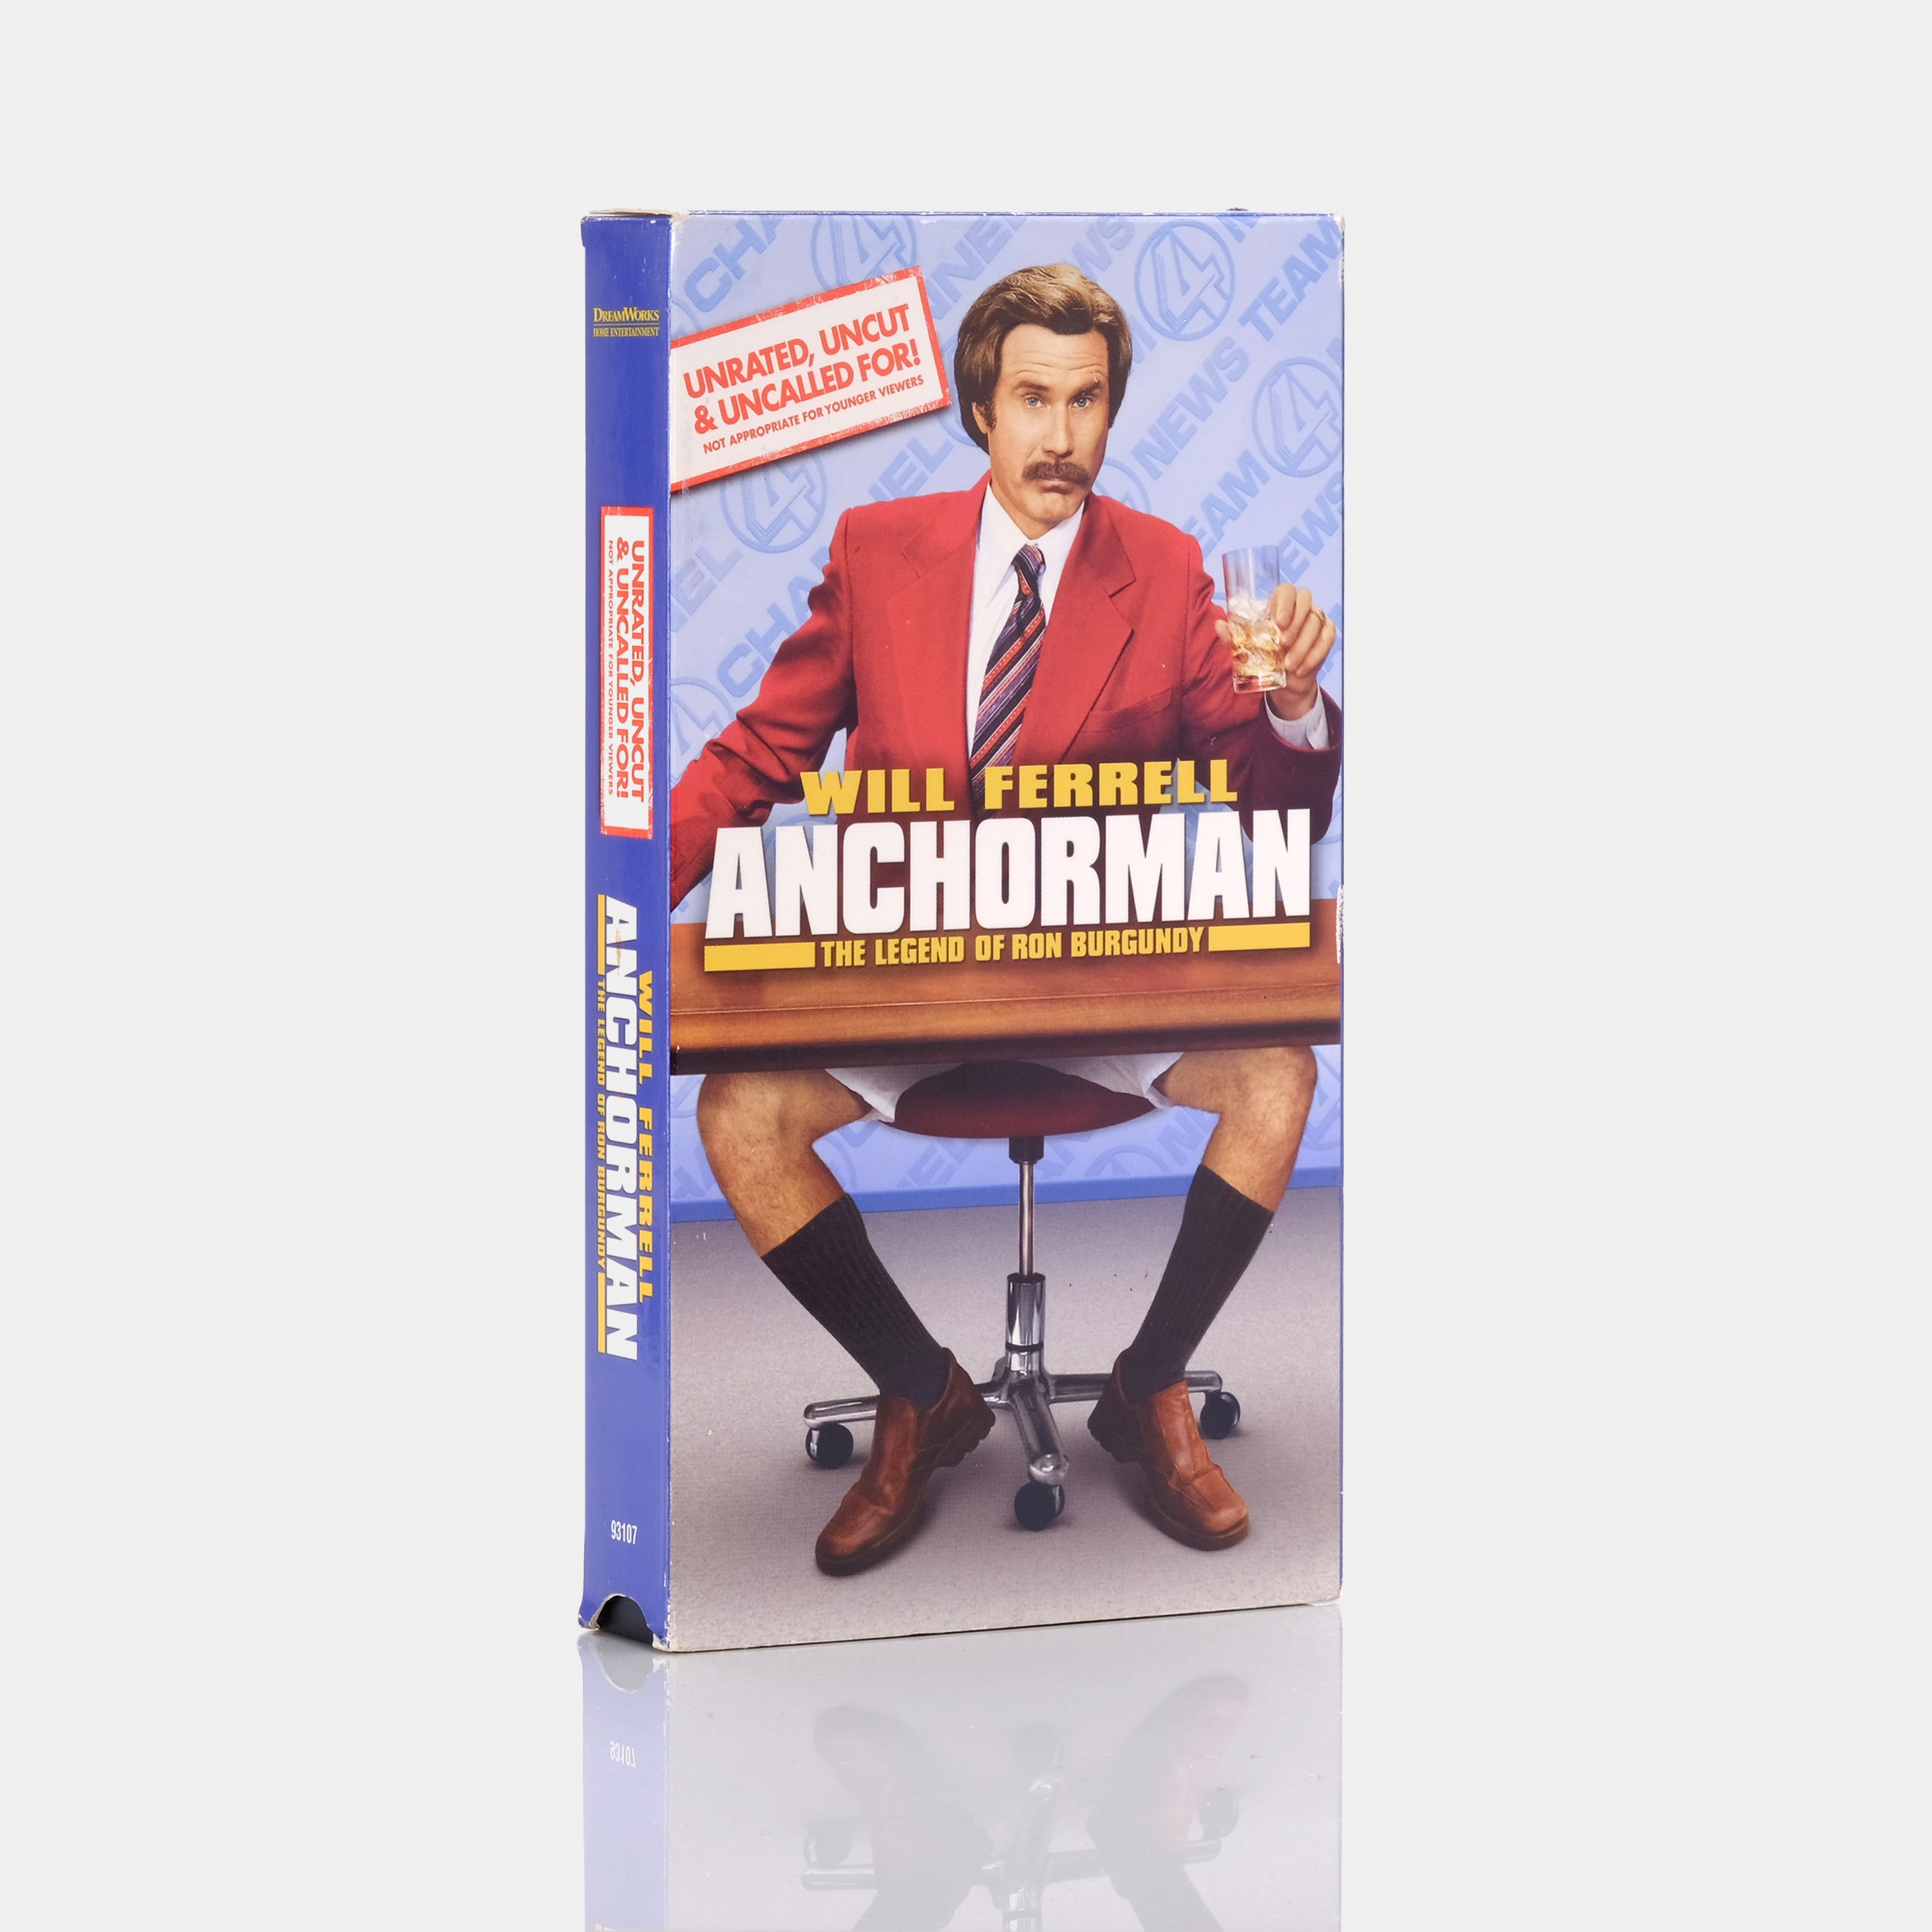 Anchorman: The Legend of Ron Burgundy (Unrated